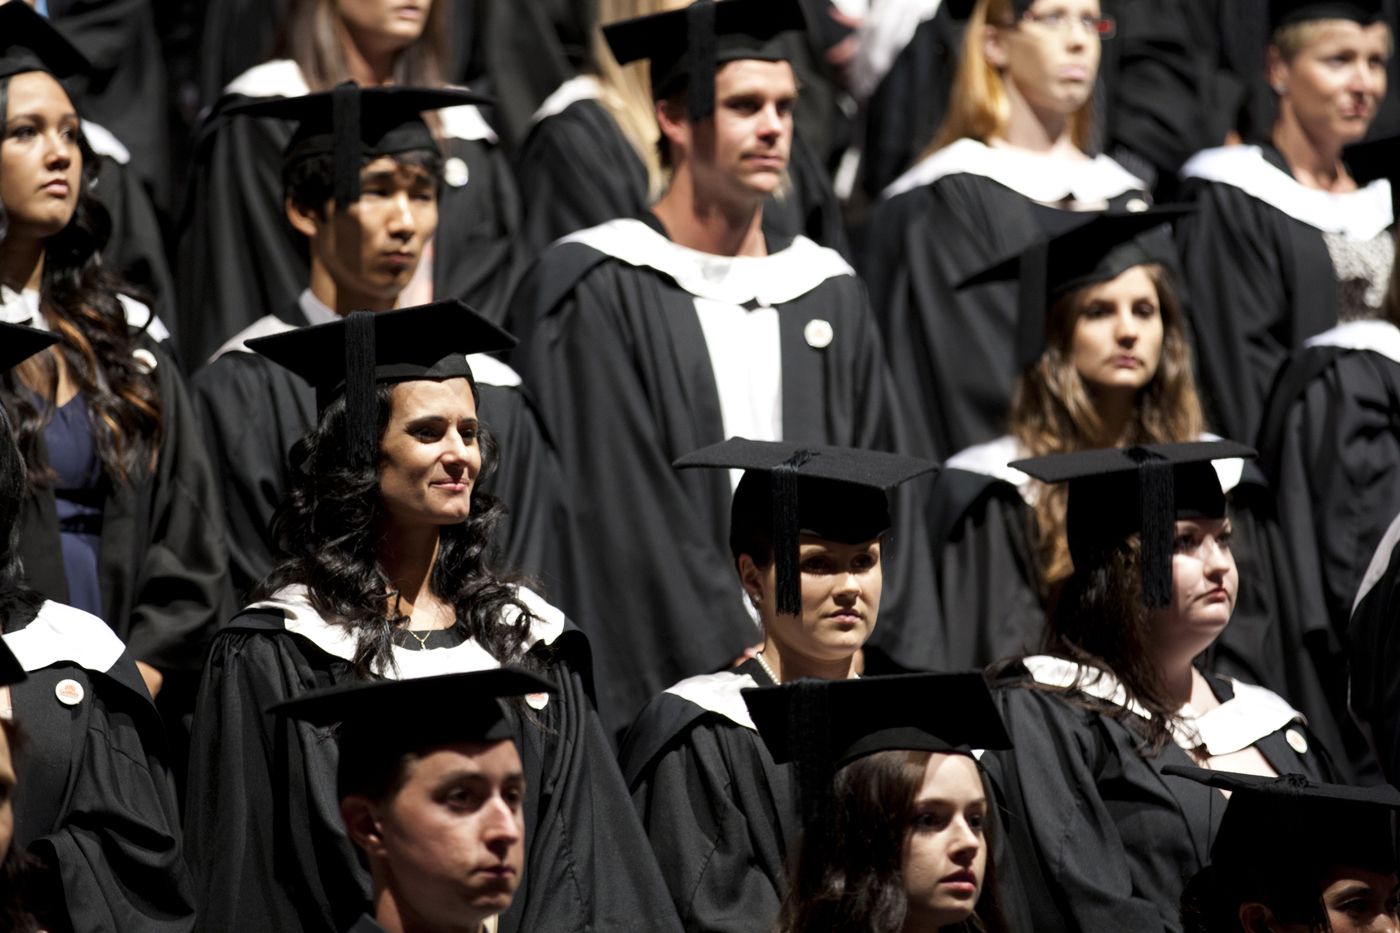 Group of graduating students at ceremony, dressed in gowns and mortar boards.